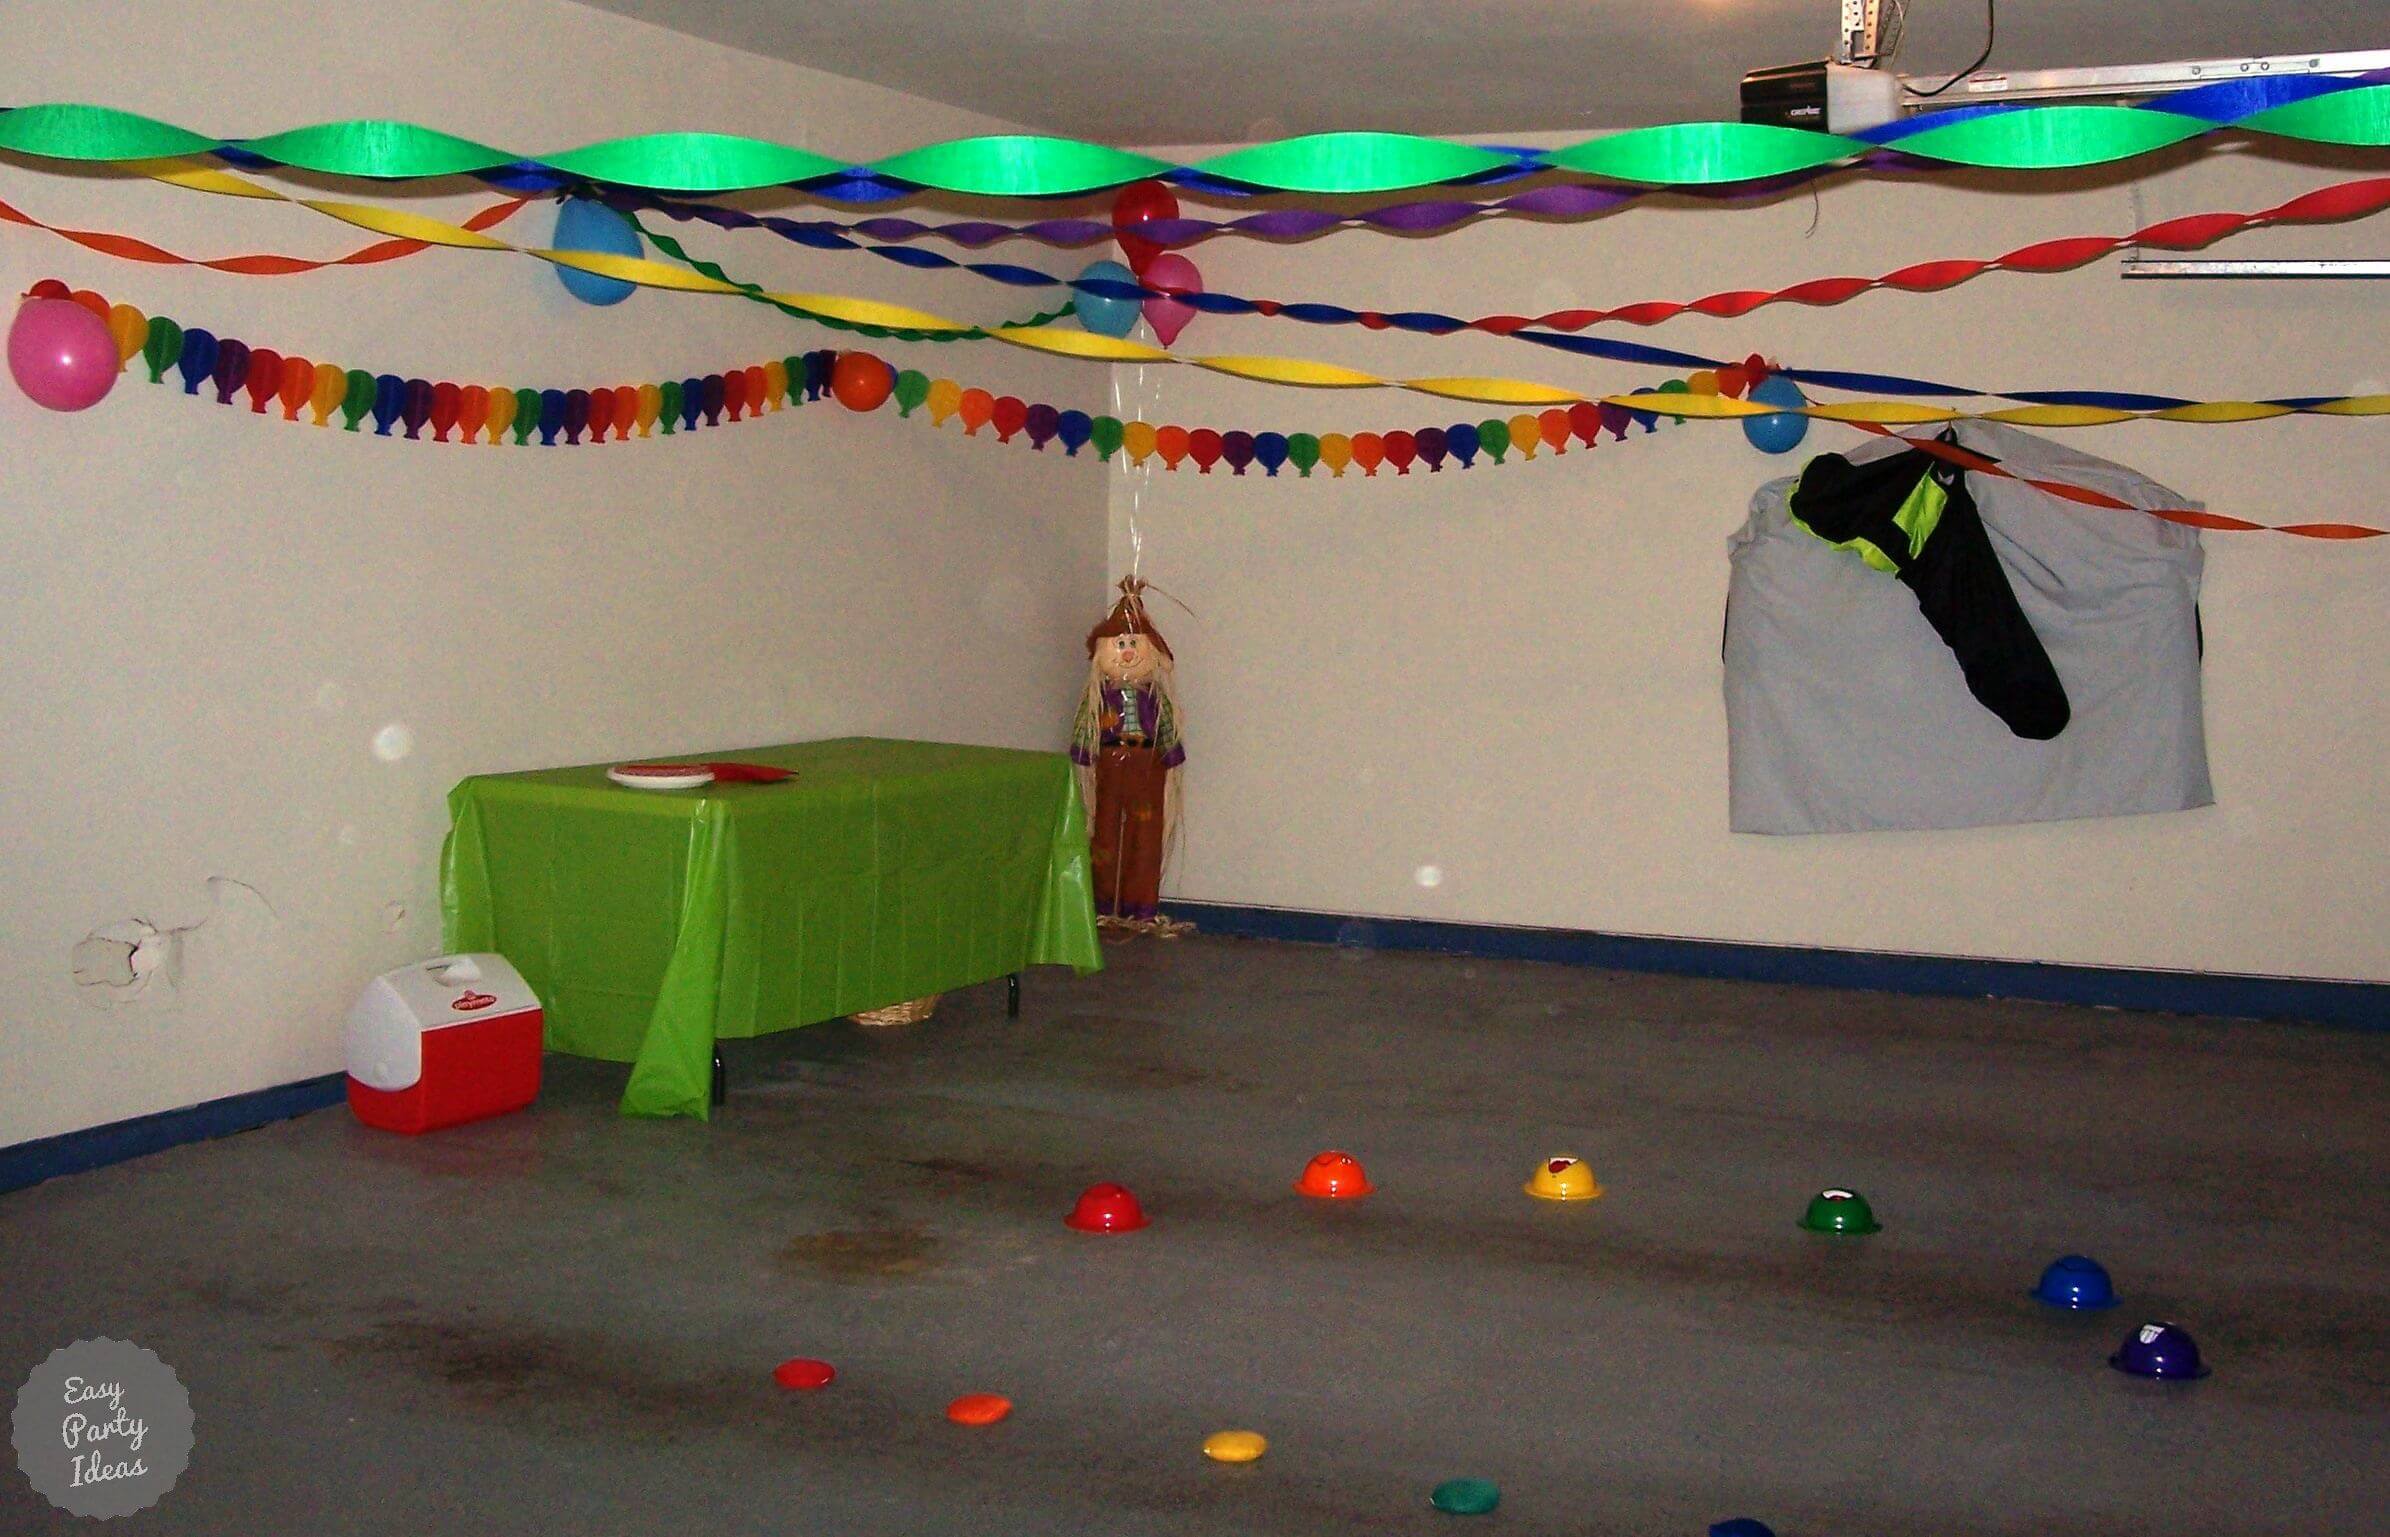 Garage decorated for a Wizard of Oz Party